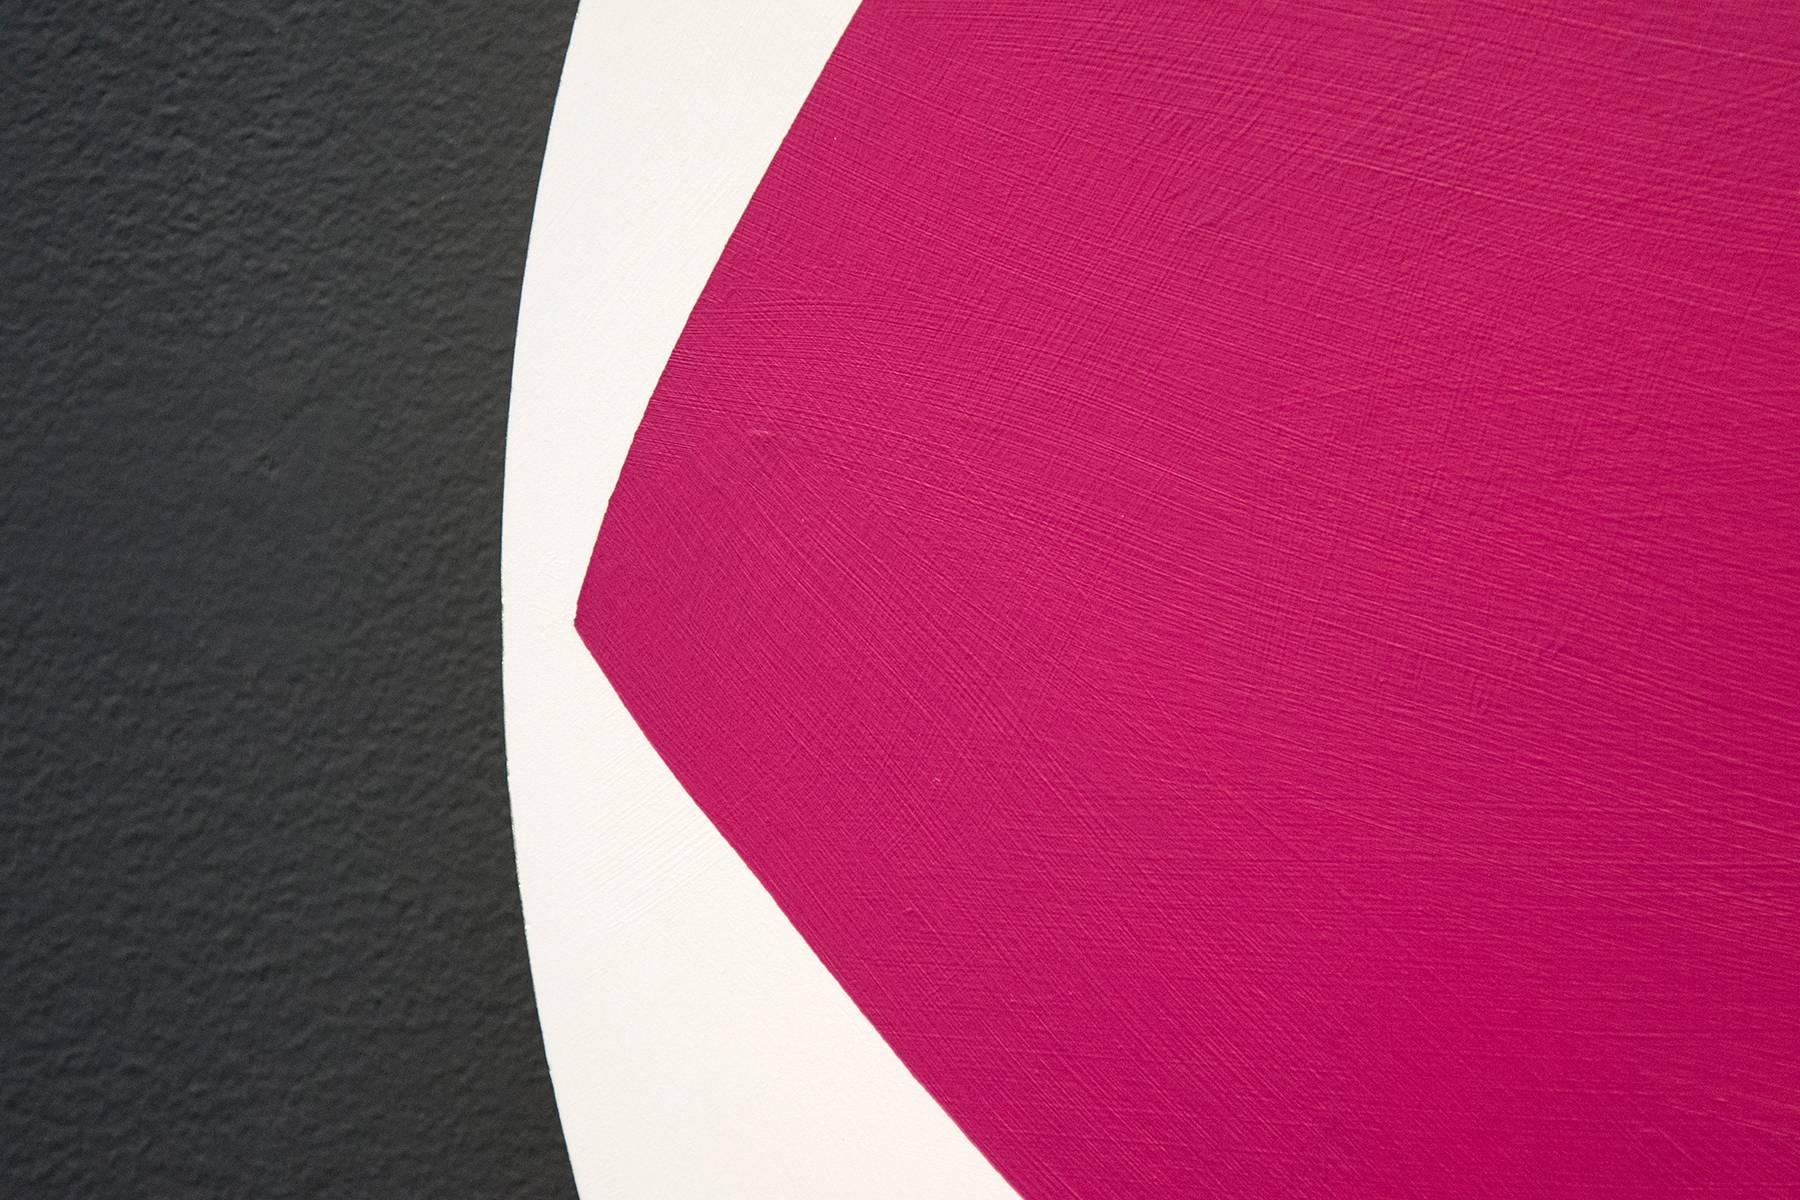 This lively painting is by Calgary’s Aron Hill. Known for bright colours and bold form, Hill has rendered a polygon in deep magenta on a white tondo (circle) rimmed with glowing gold leaf against a black backdrop. This is one in a series of